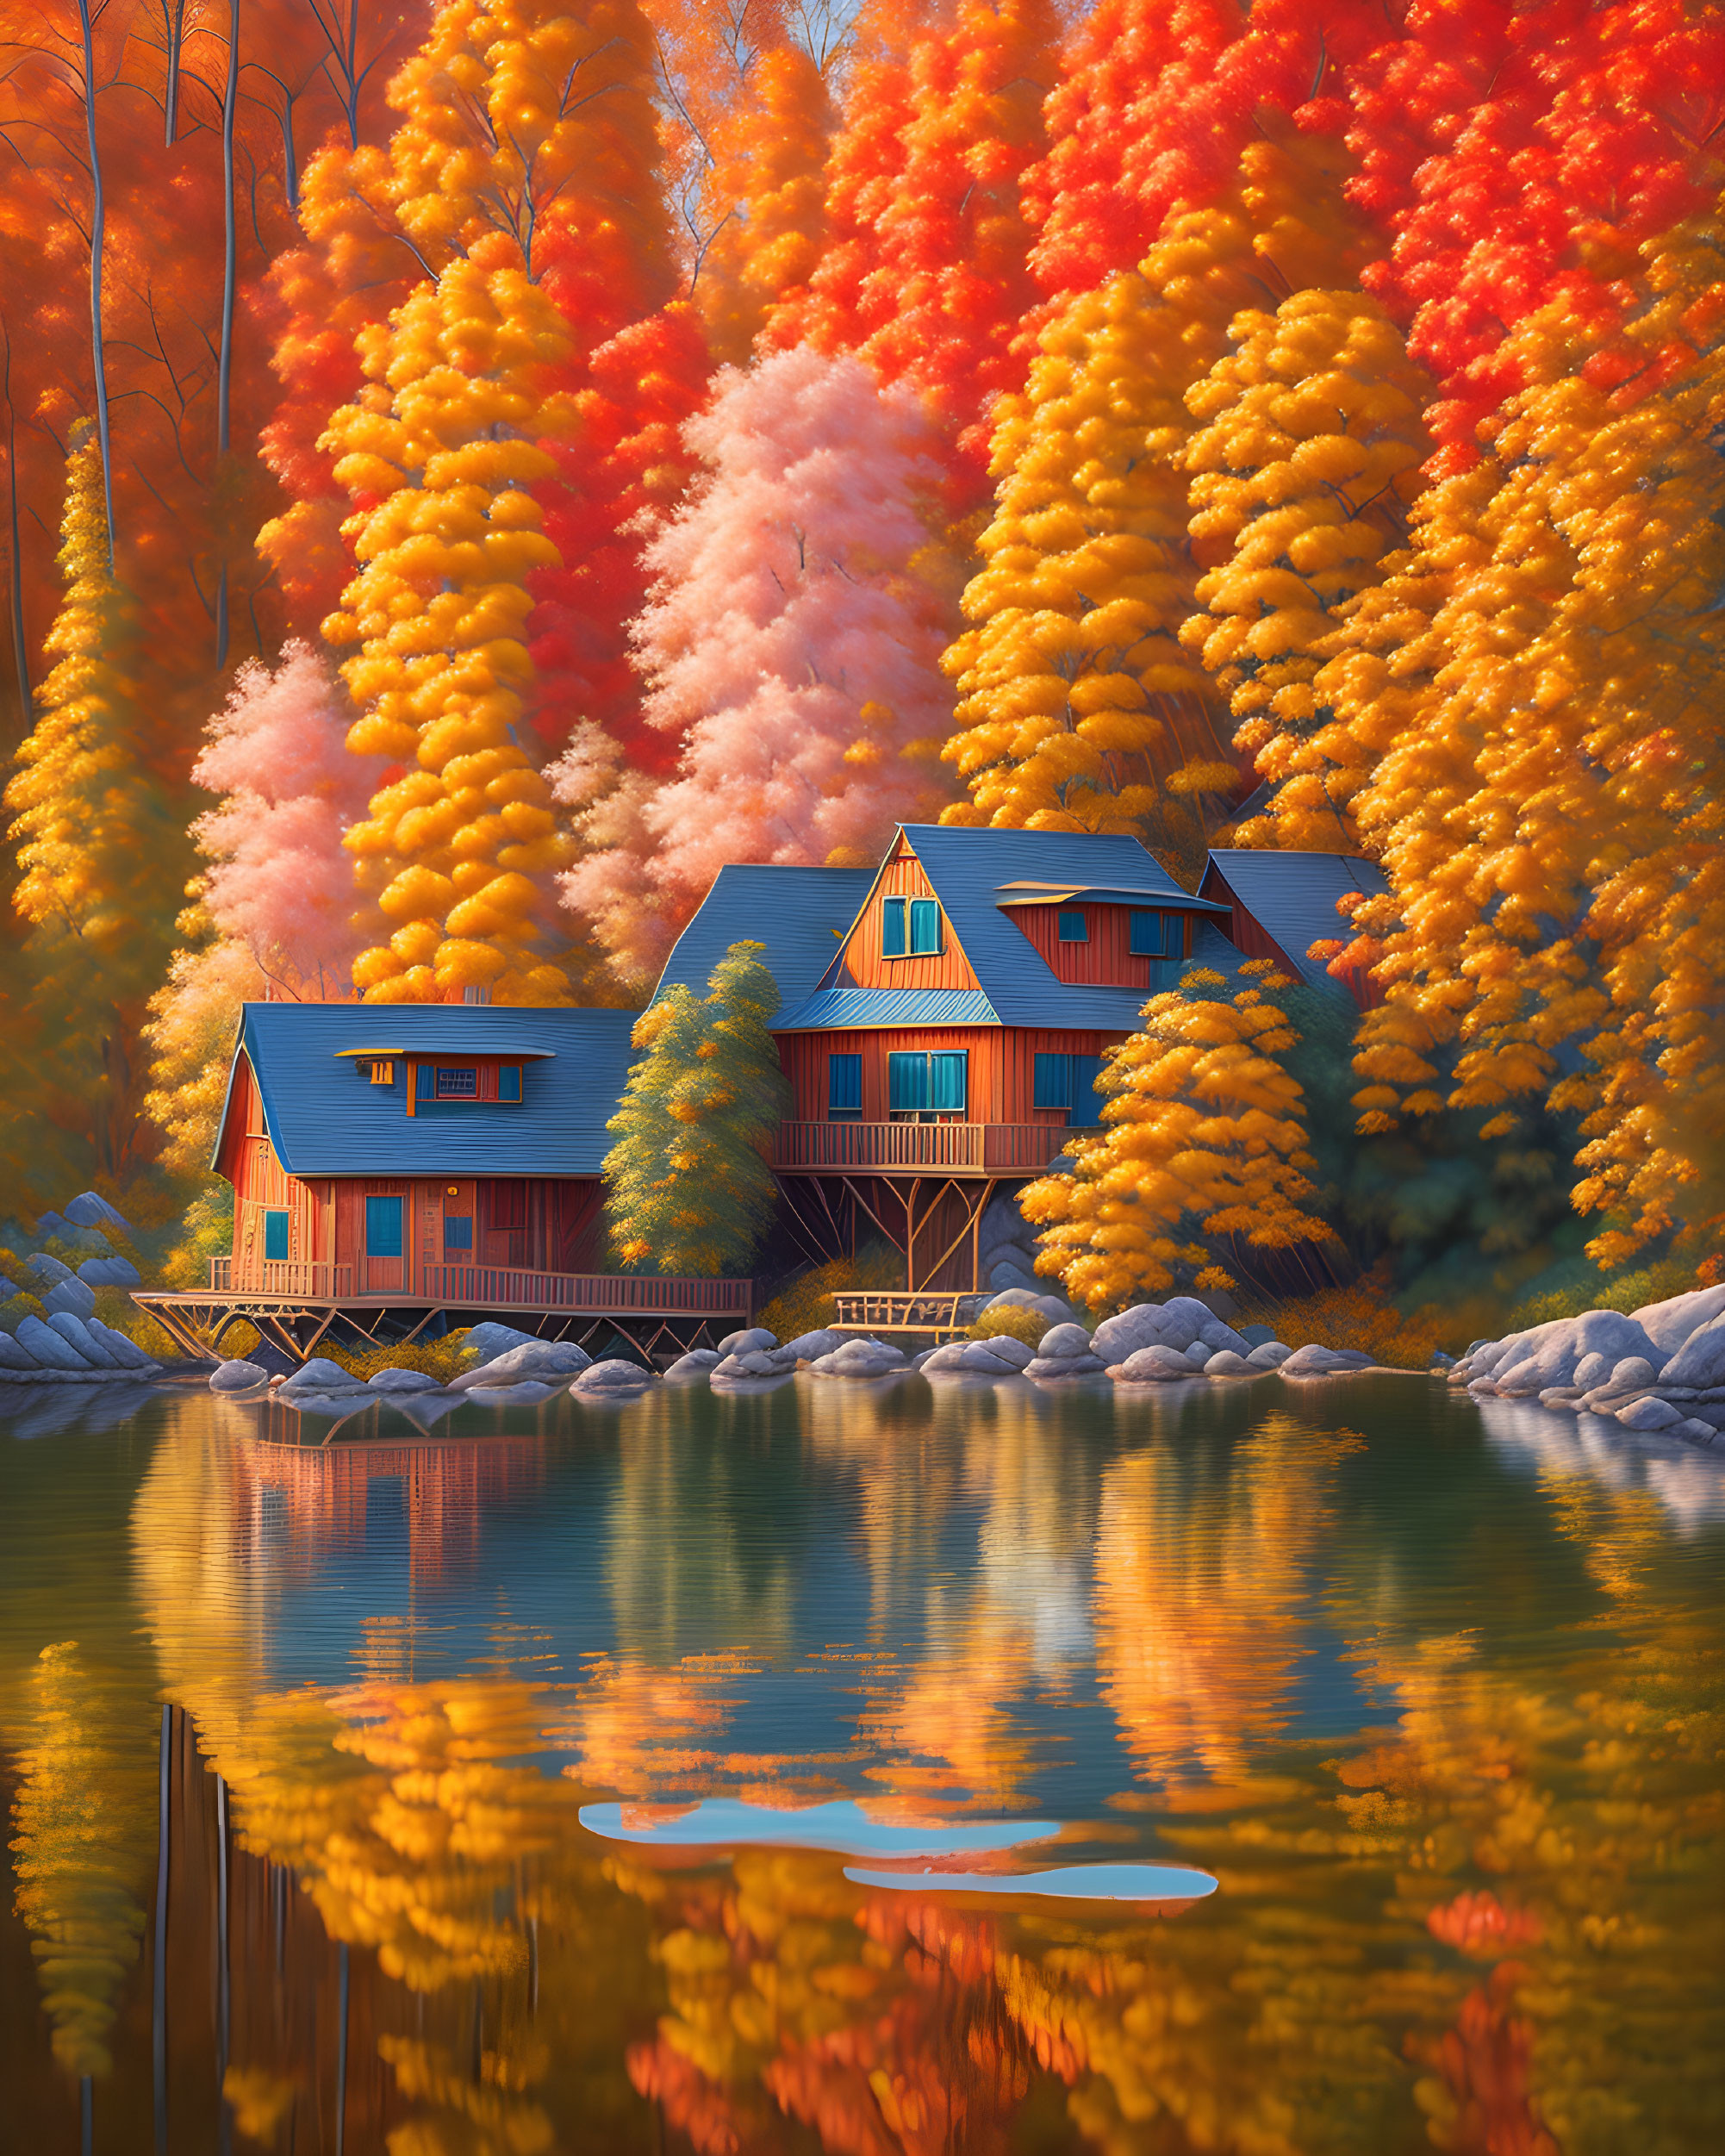 Another Autumn Boat House